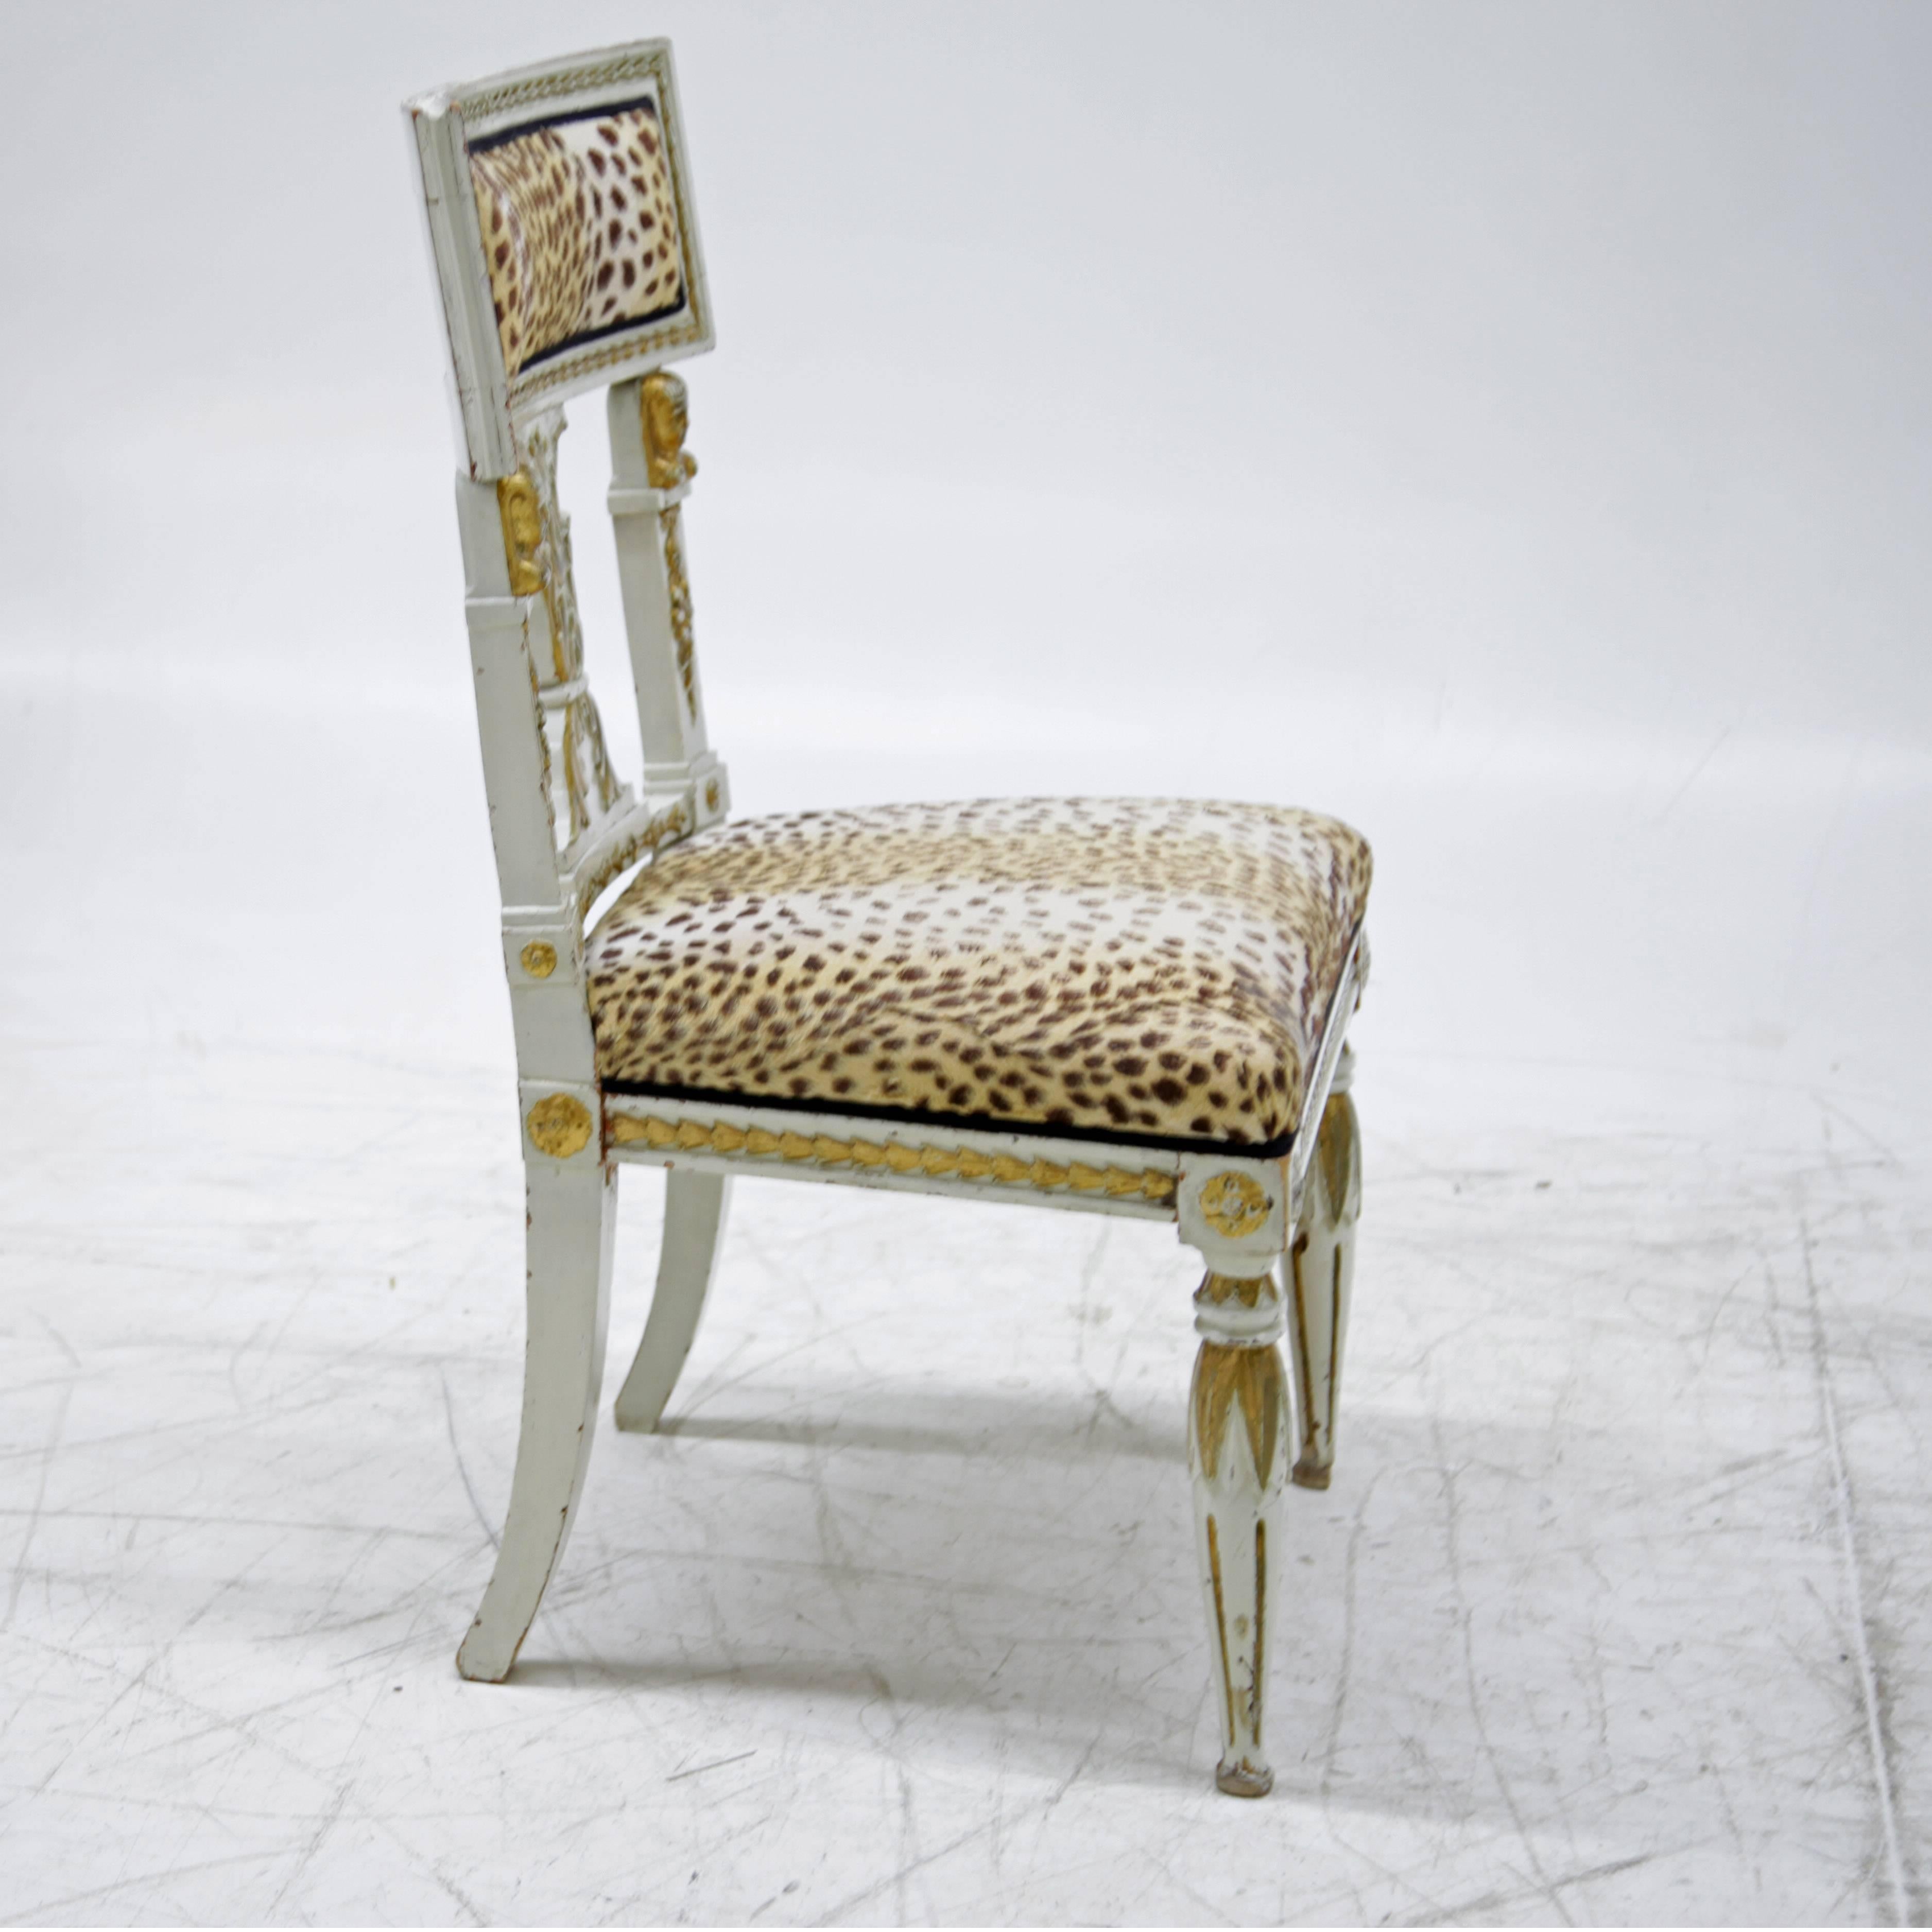 European Dining Room Chairs in Gustavian Style, Second Half of the 19th Century